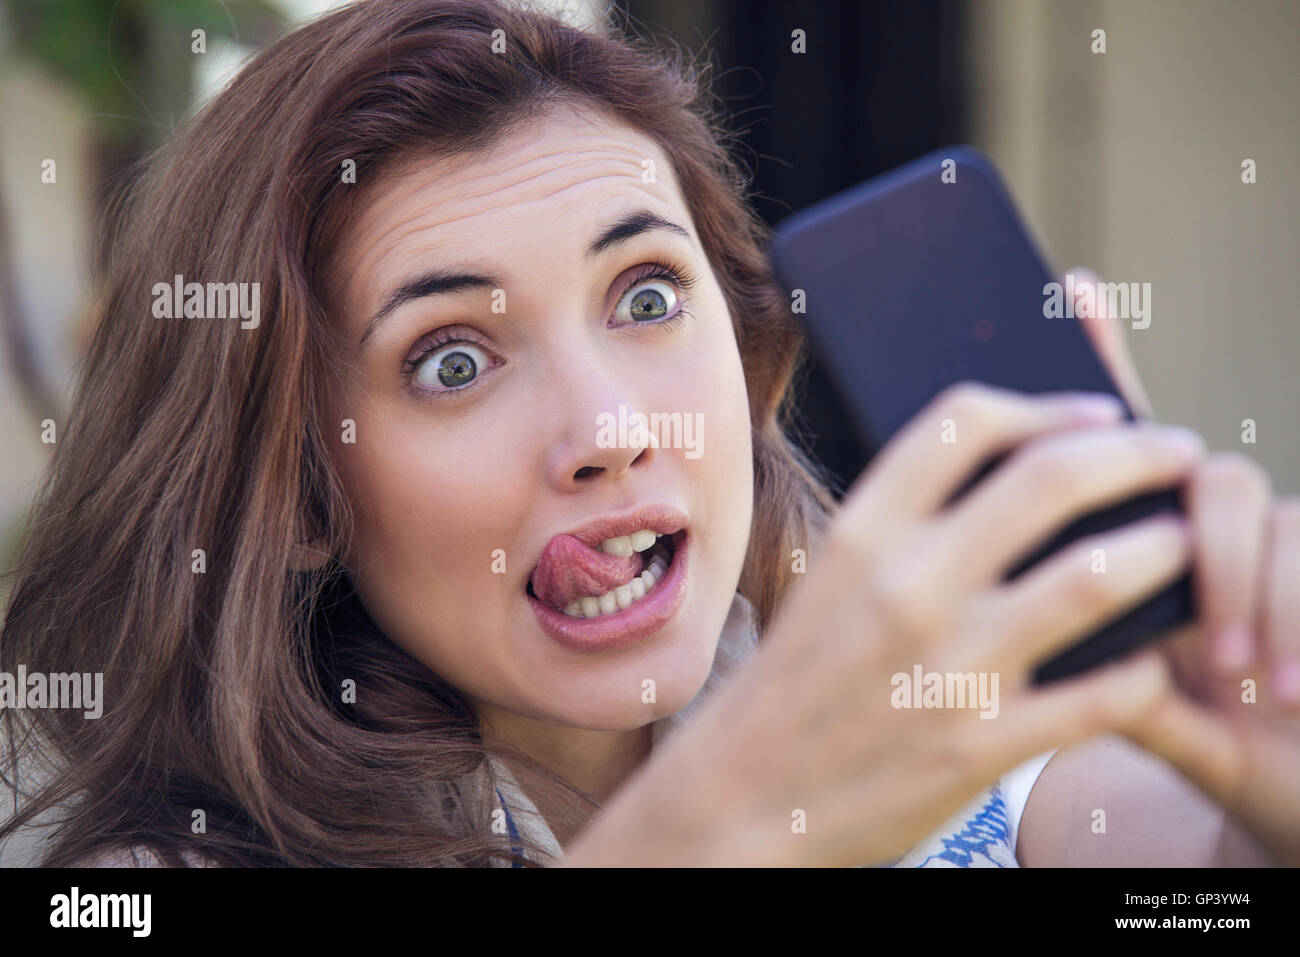 Woman making faces while taking selfie Stock Photo